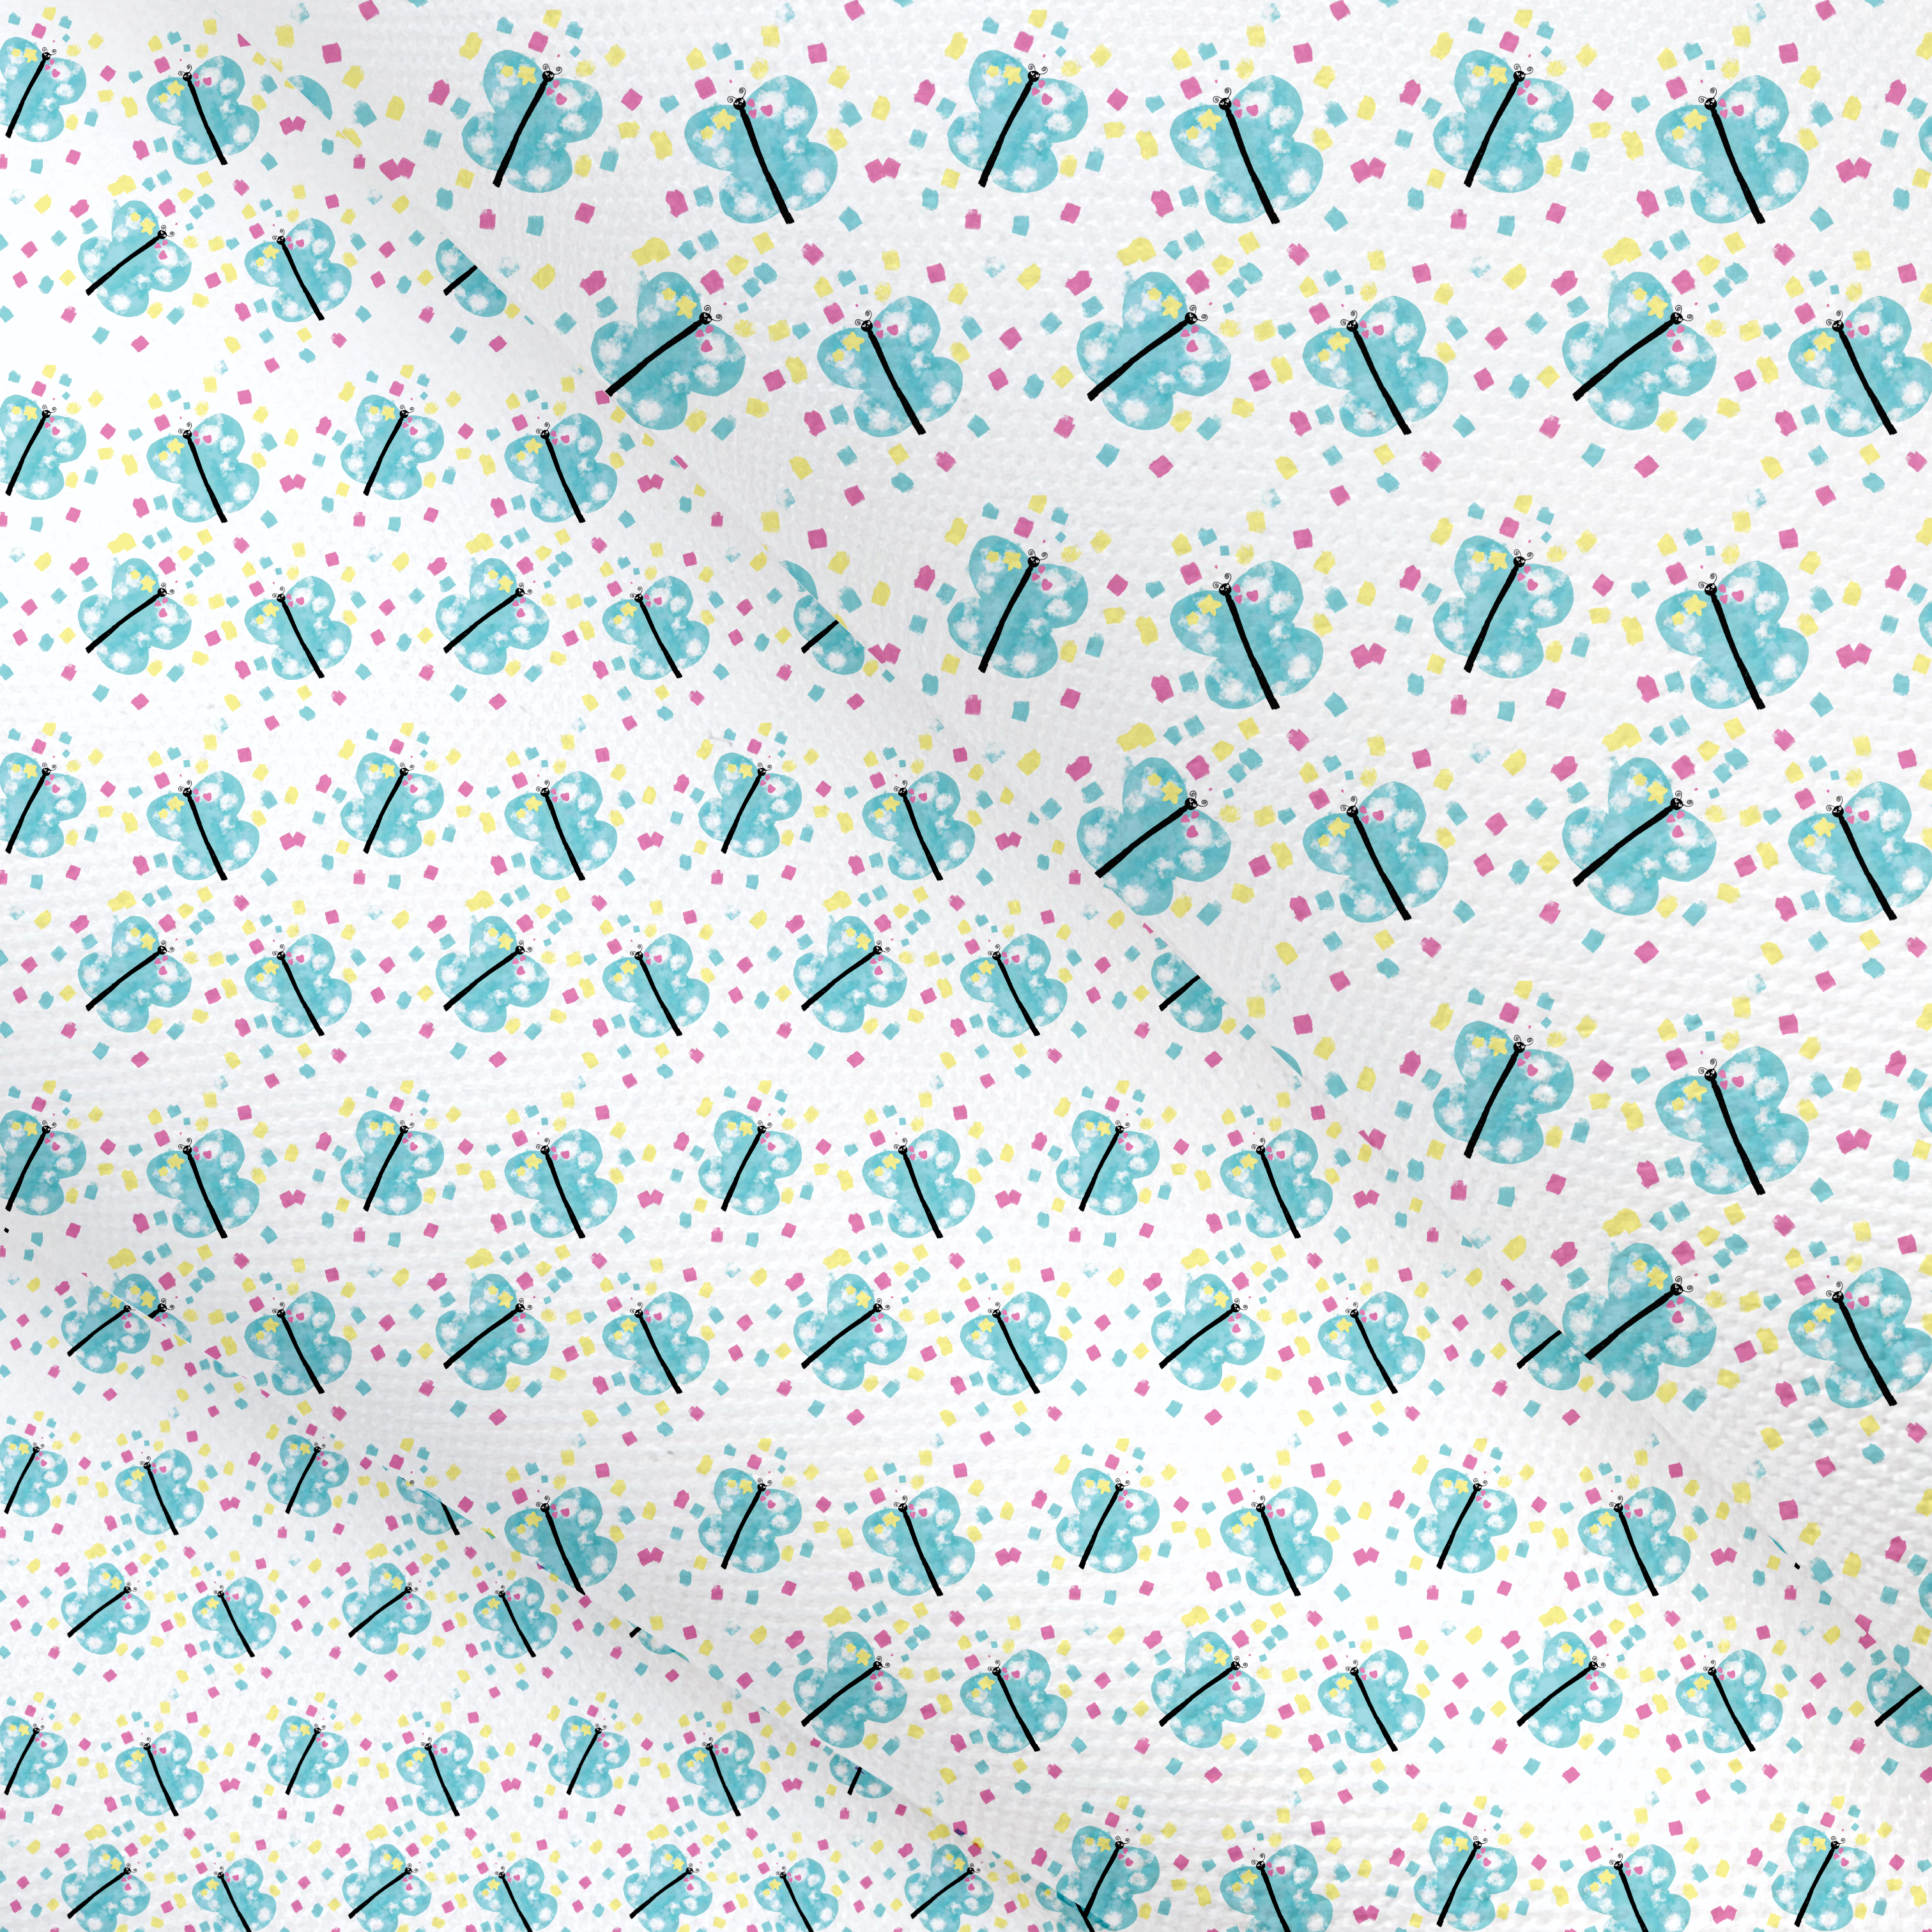 Aria Butterfly ‘Tiny Designer’ Canvas Lux Premium Printed Fabric- 3 Sizes